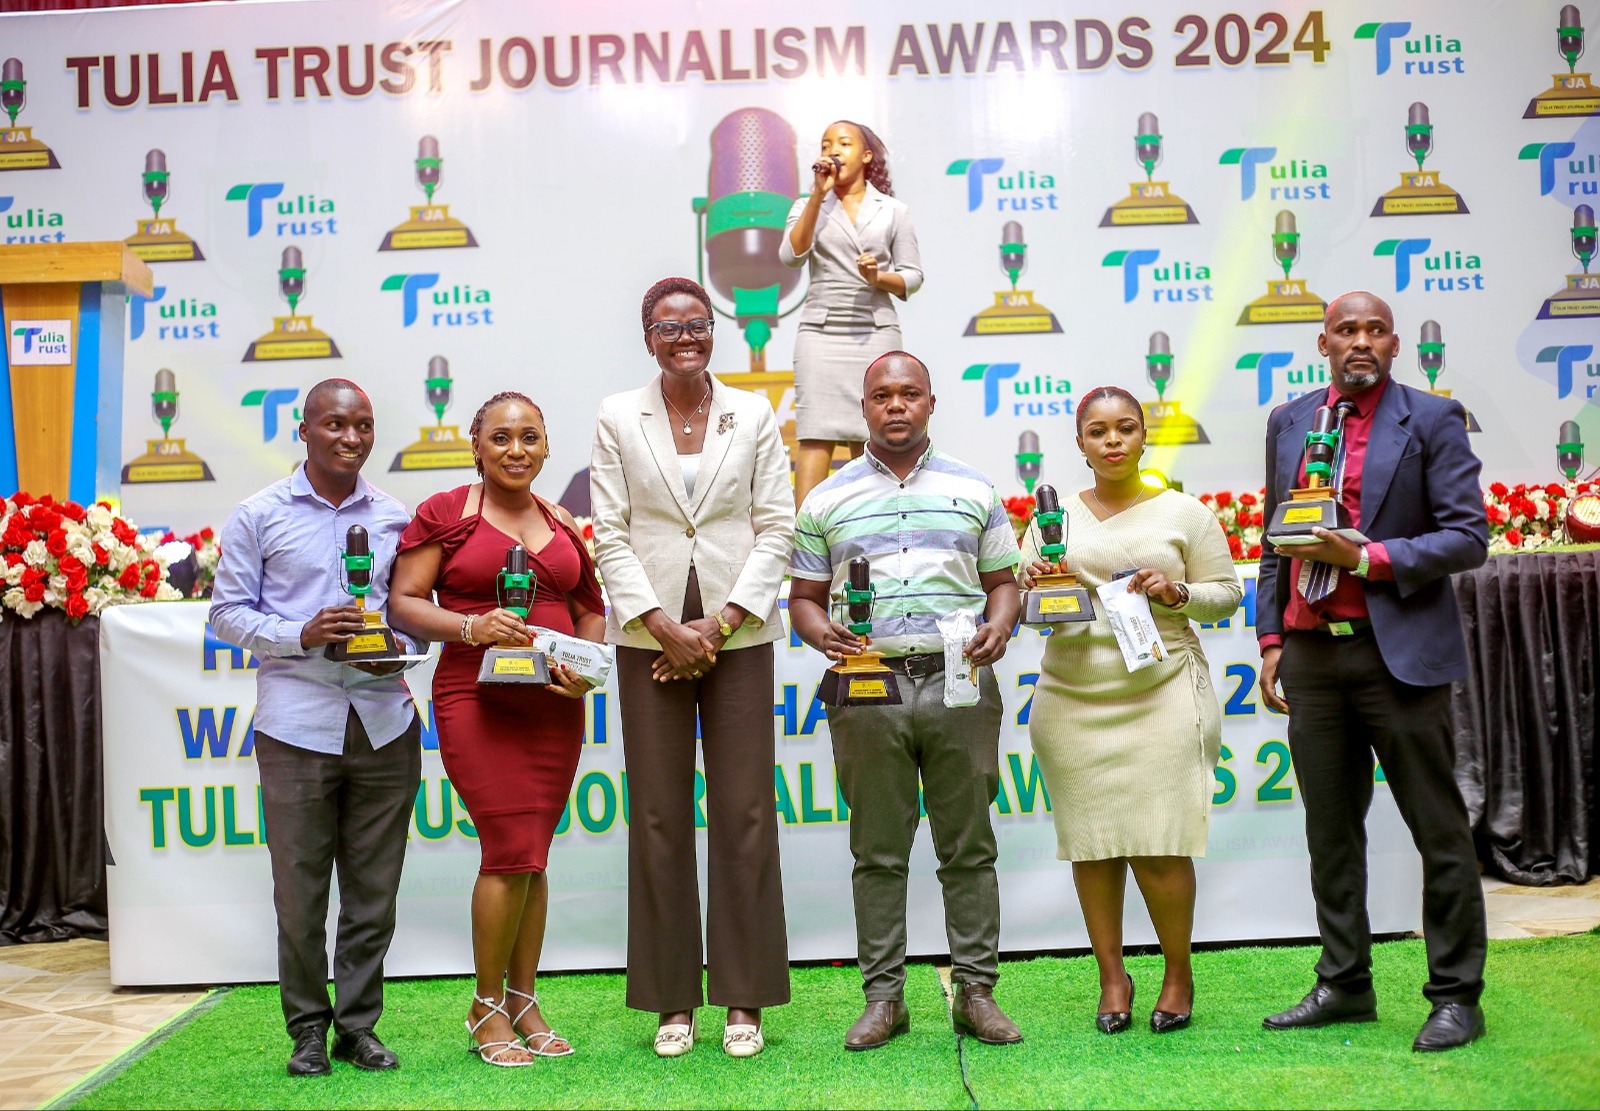 National Assembly Speaker Dr. Tulia Ackson (3rd-l) poses with IPP Media journalists who won the Tulia Trust Journalism Awards (TJA) 2024.